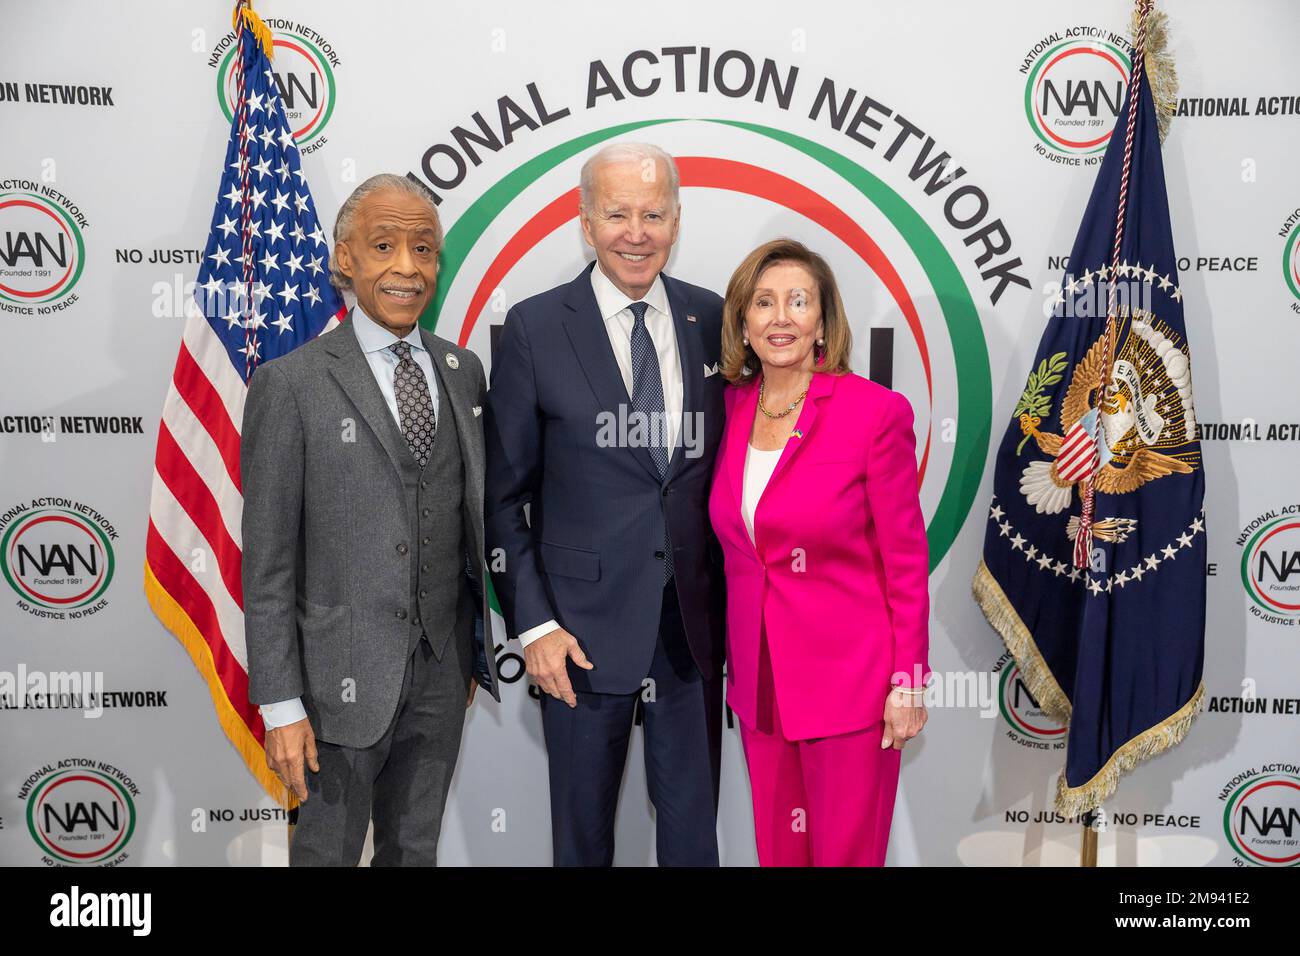 Washington, United States Of America. 16th Jan, 2023. Washington, United States of America. 16 January, 2023. U.S President Joe Biden, center, poses with Rev. Al Sharpton, left, and former Speaker Nancy Pelosi during the National Action Network annual Martin Luther King Day breakfast at the Mayflower Hotel, January 16, 2023 in Washington, DC Credit: Adam Schultz/White House Photo/Alamy Live News Stock Photo